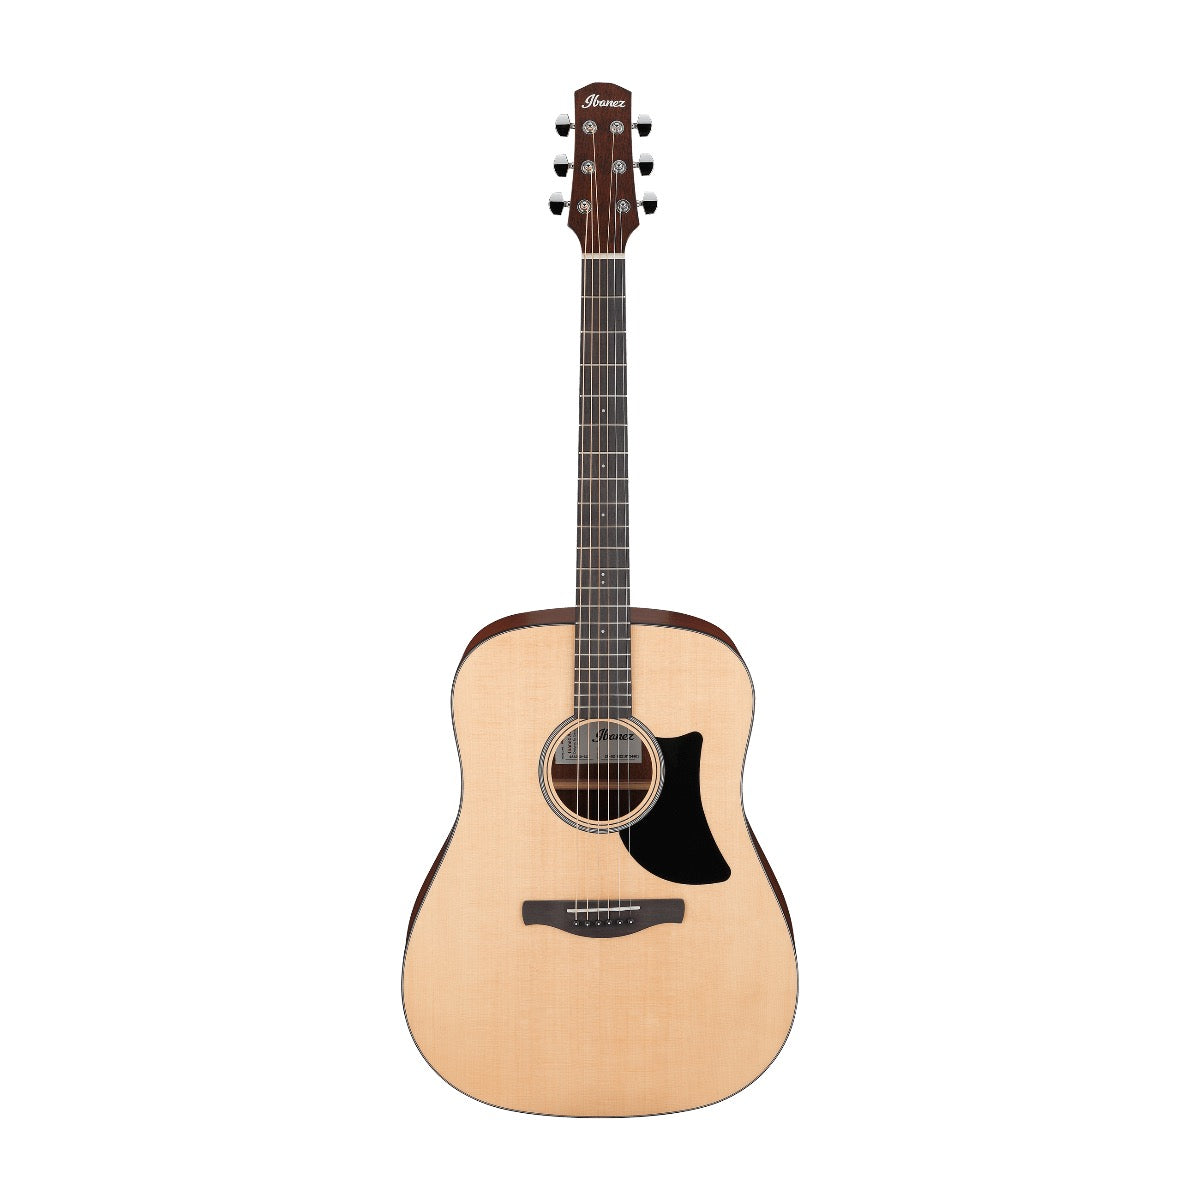 Ibanez AAD50 Advanced Acoustic Guitar - Low Gloss Natural, View 2